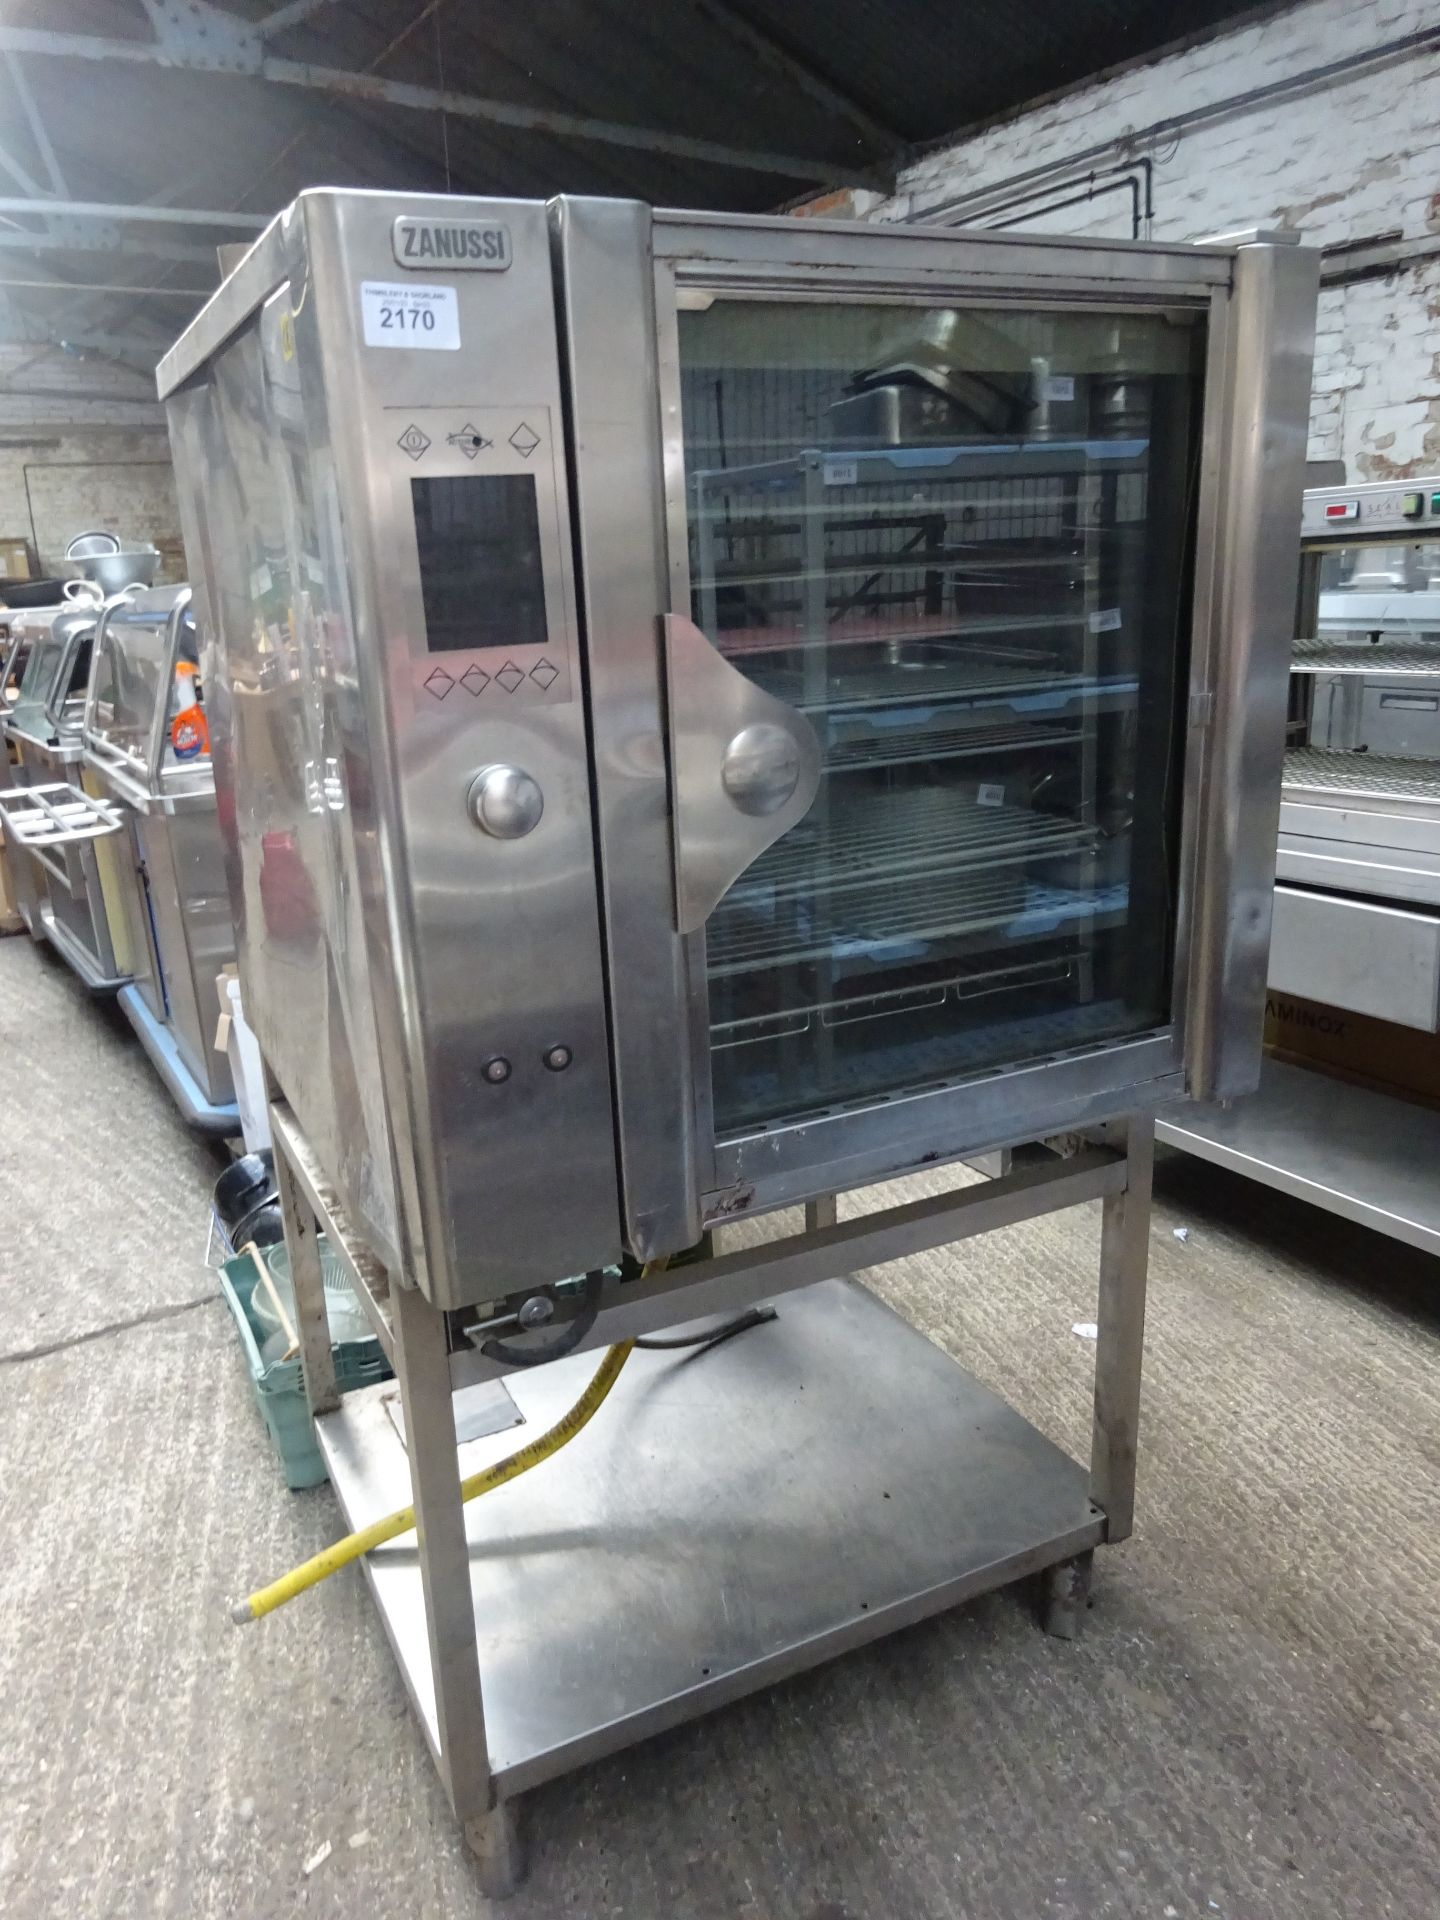 Zanussi ten grid gas combi oven on stand